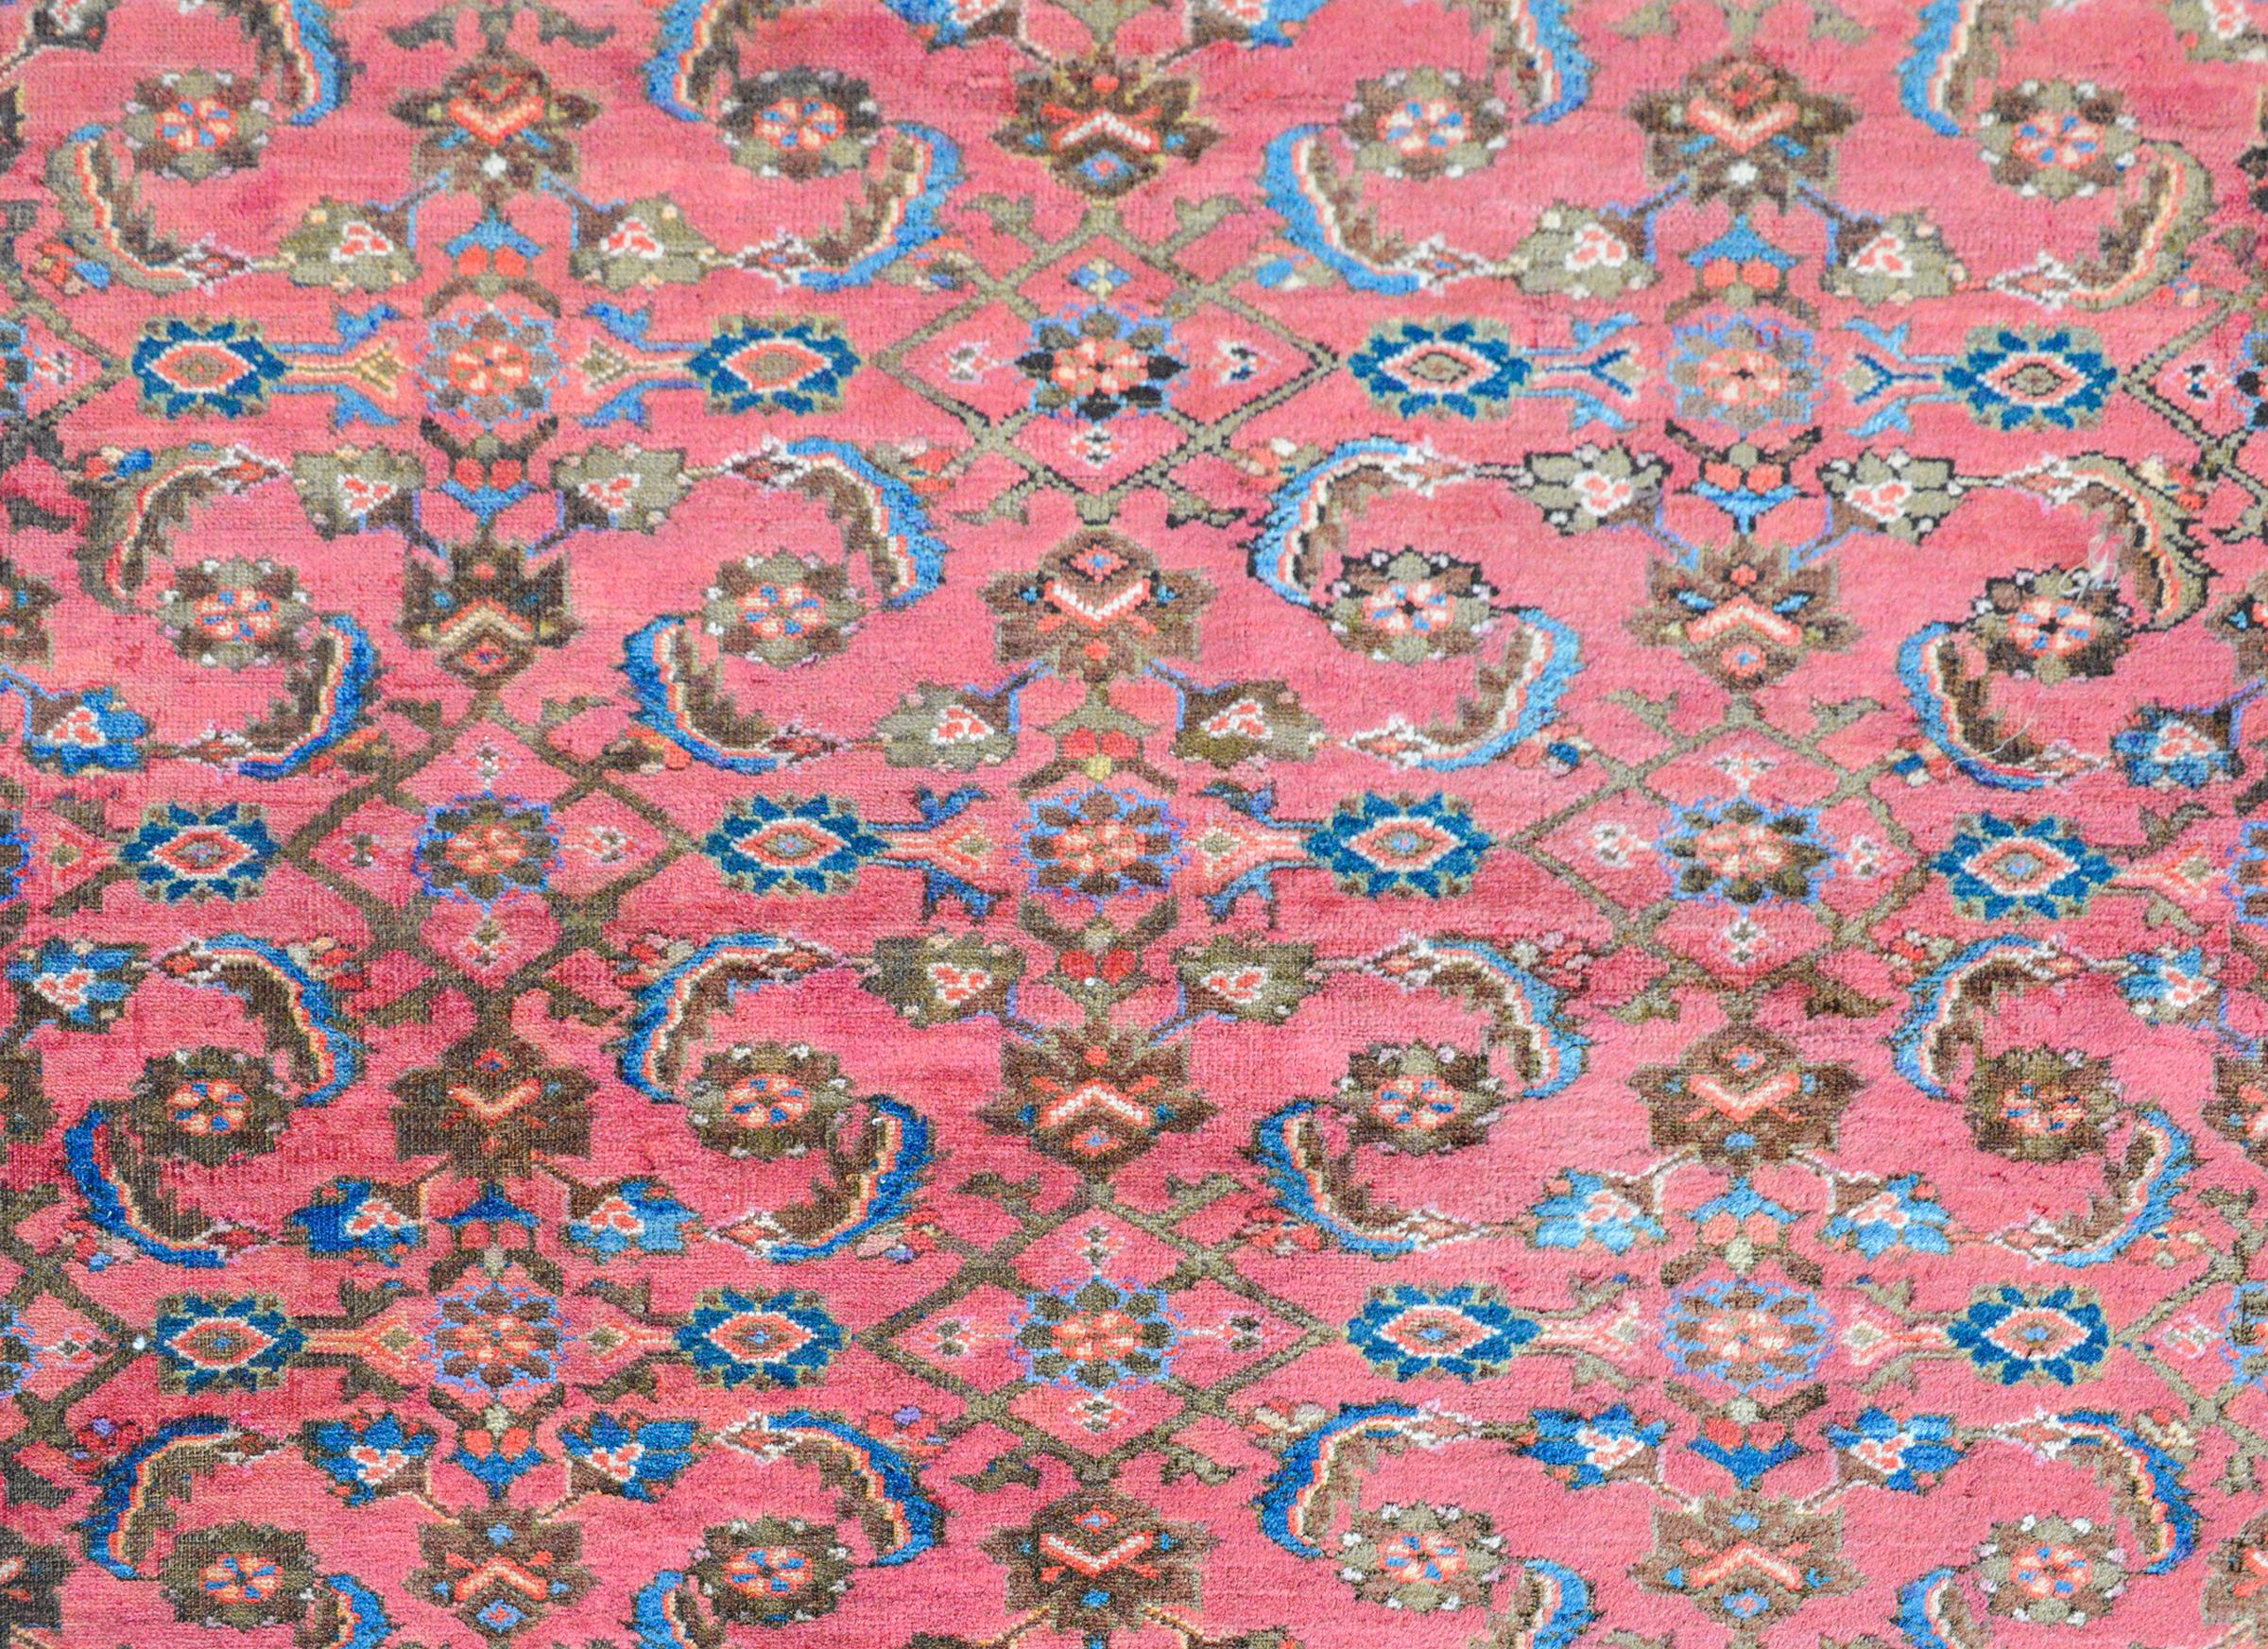 A beautiful early 20th century Persian Malayer rug with a Herati pattern including leaves, flowers, and stylized shrimp, and surrounded by a wide border composed of several thin petite floral partnered stripes, and all woven in light and dark